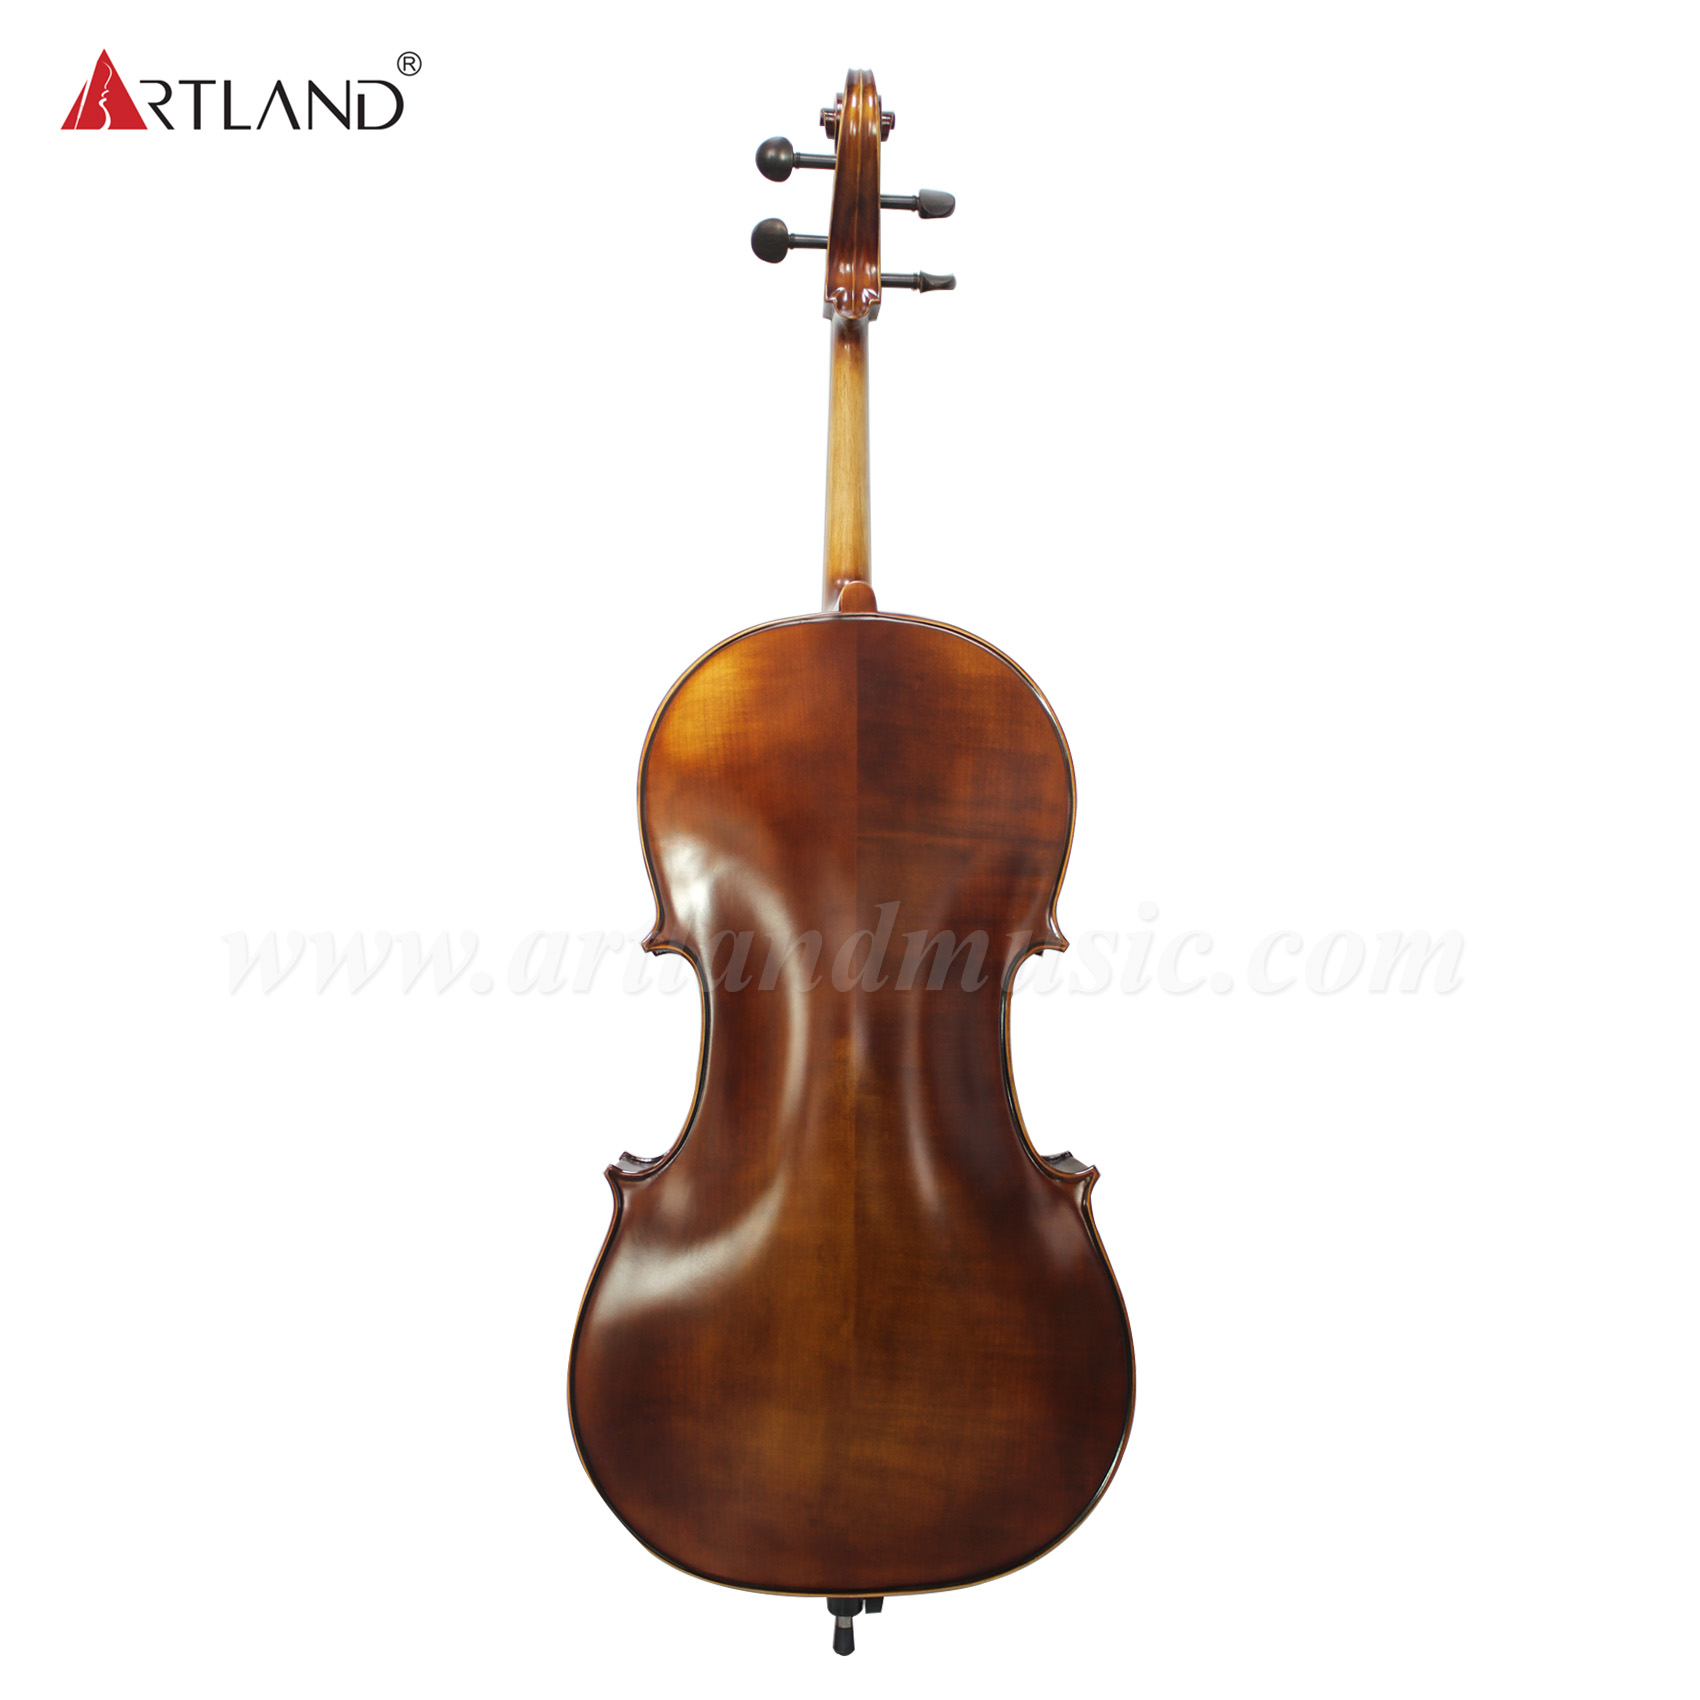  High Quality General Grade Cello with Ebony Fitting Varnish Hand Rubbed Stain(GC104H)